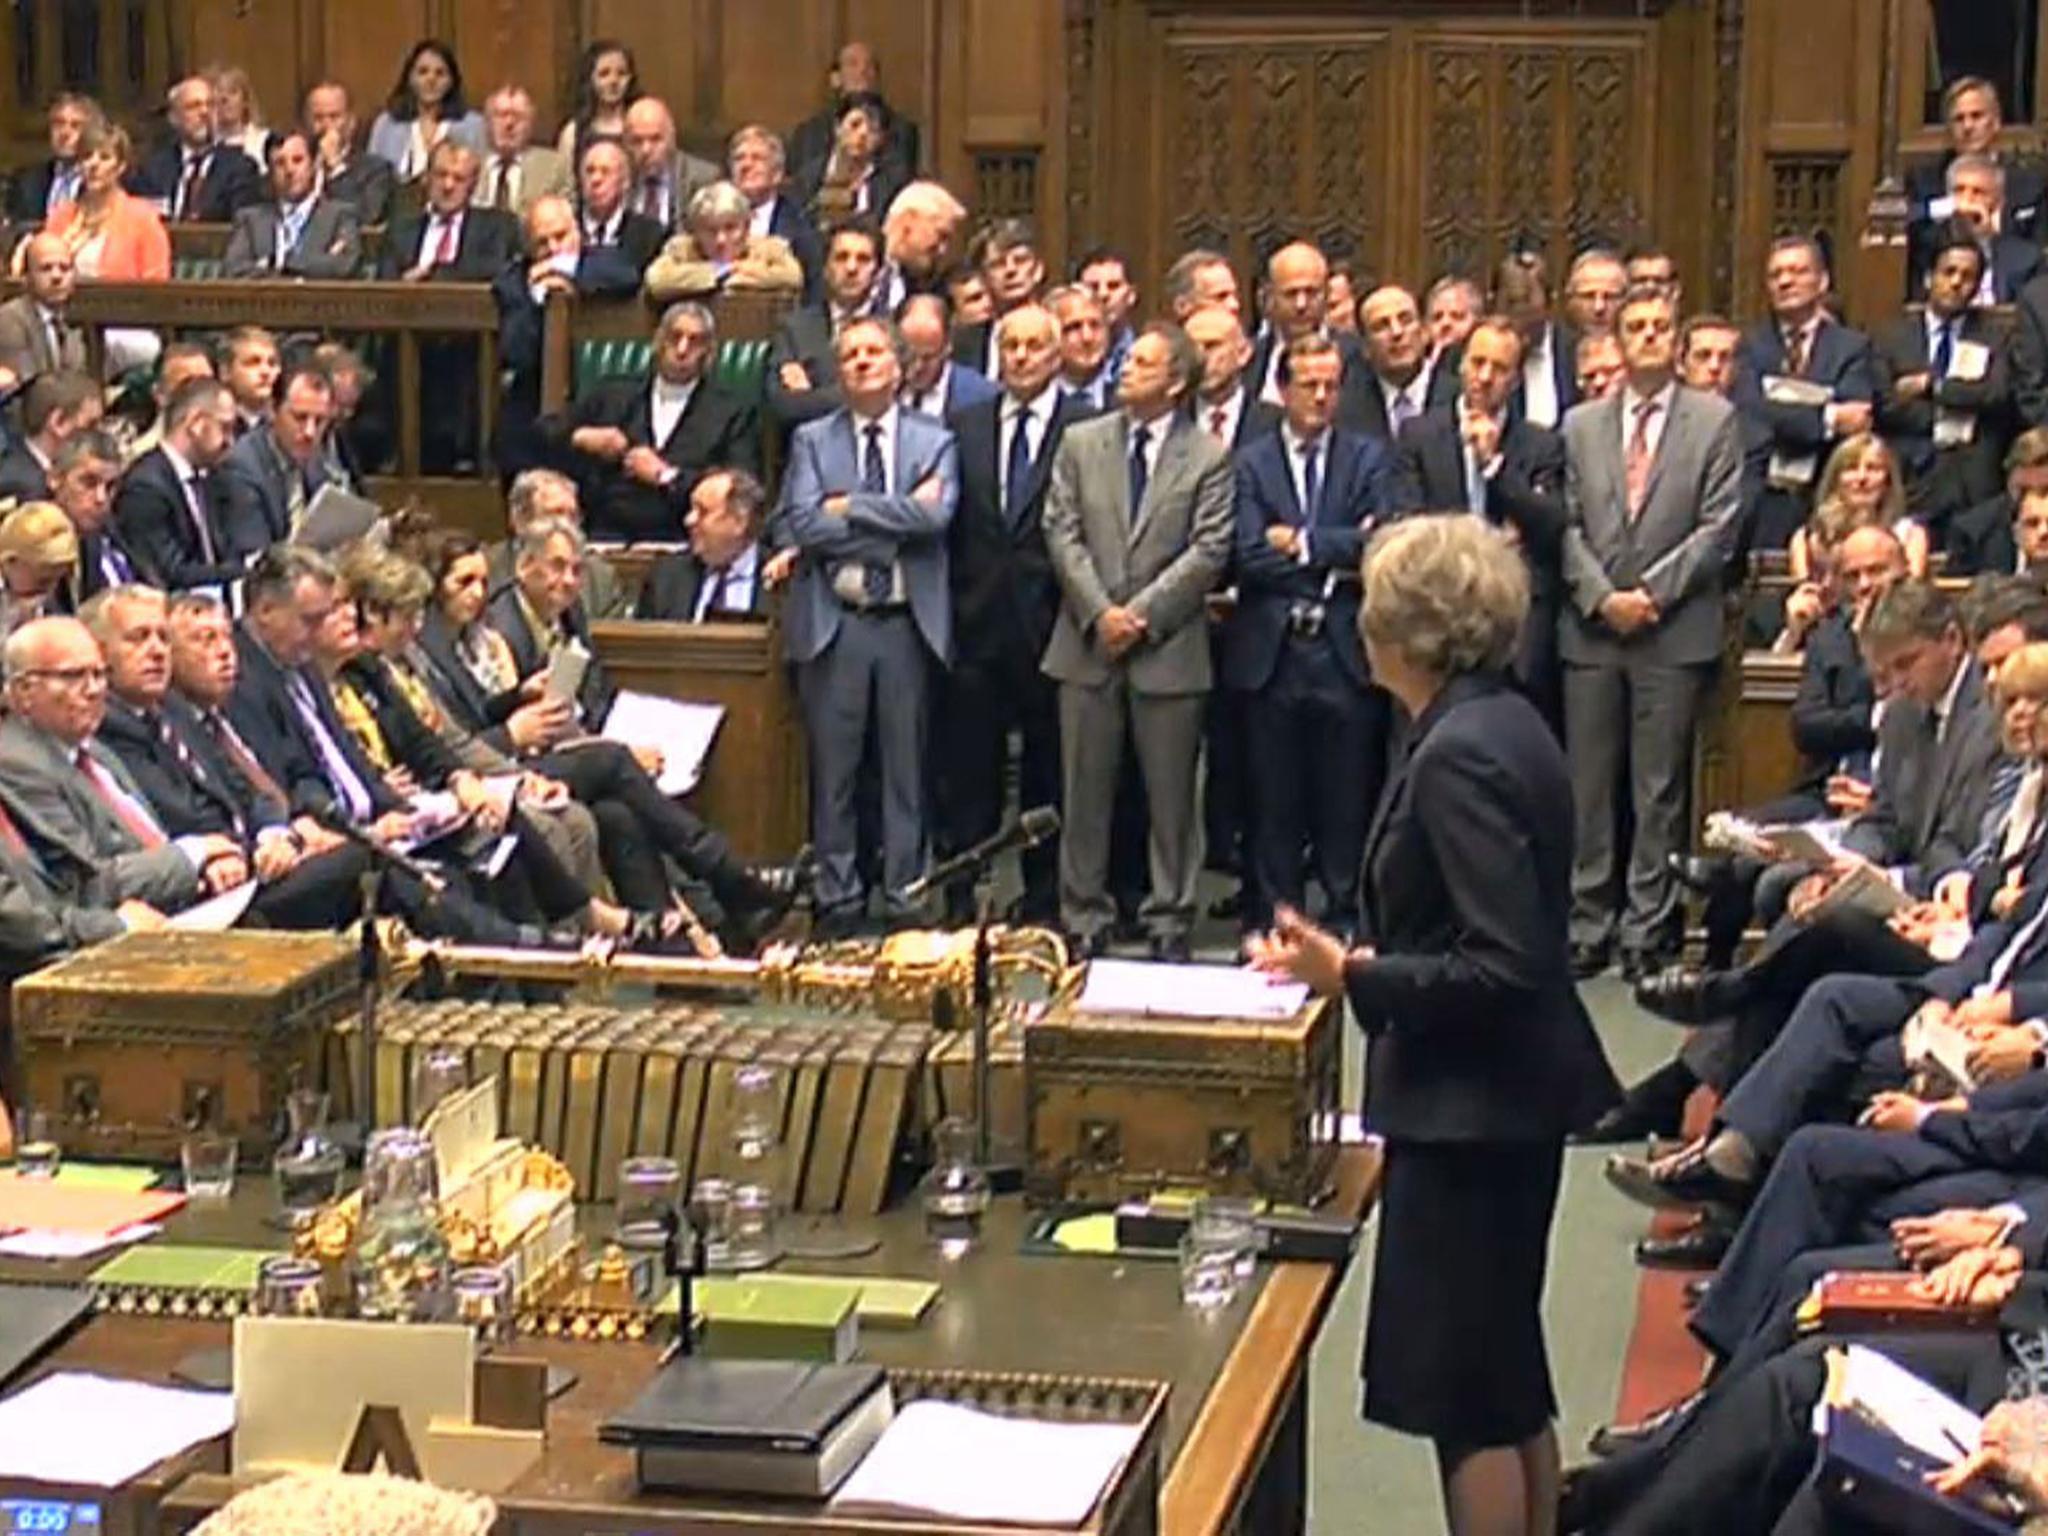 Prime Minister Theresa May in the Commons